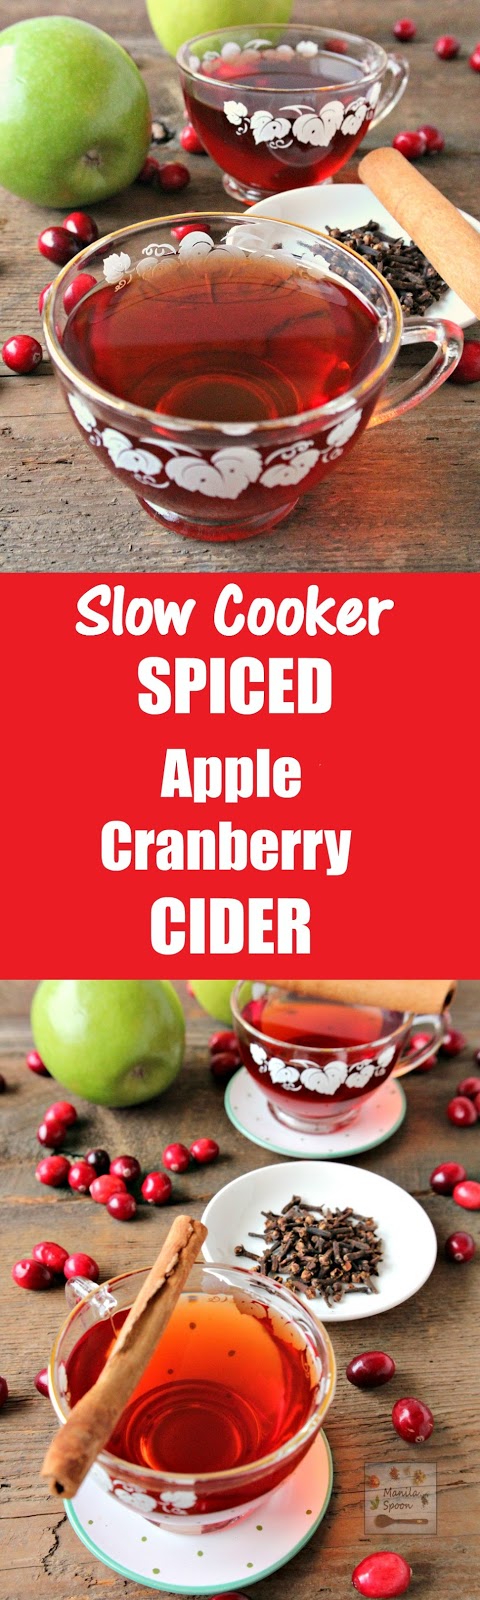 A deliciously spiced fruity cider with a mix of apple and cranberry juices and made in the slow cooker for ease and convenience. Family friendly and party-perfect! | manilaspoon.com